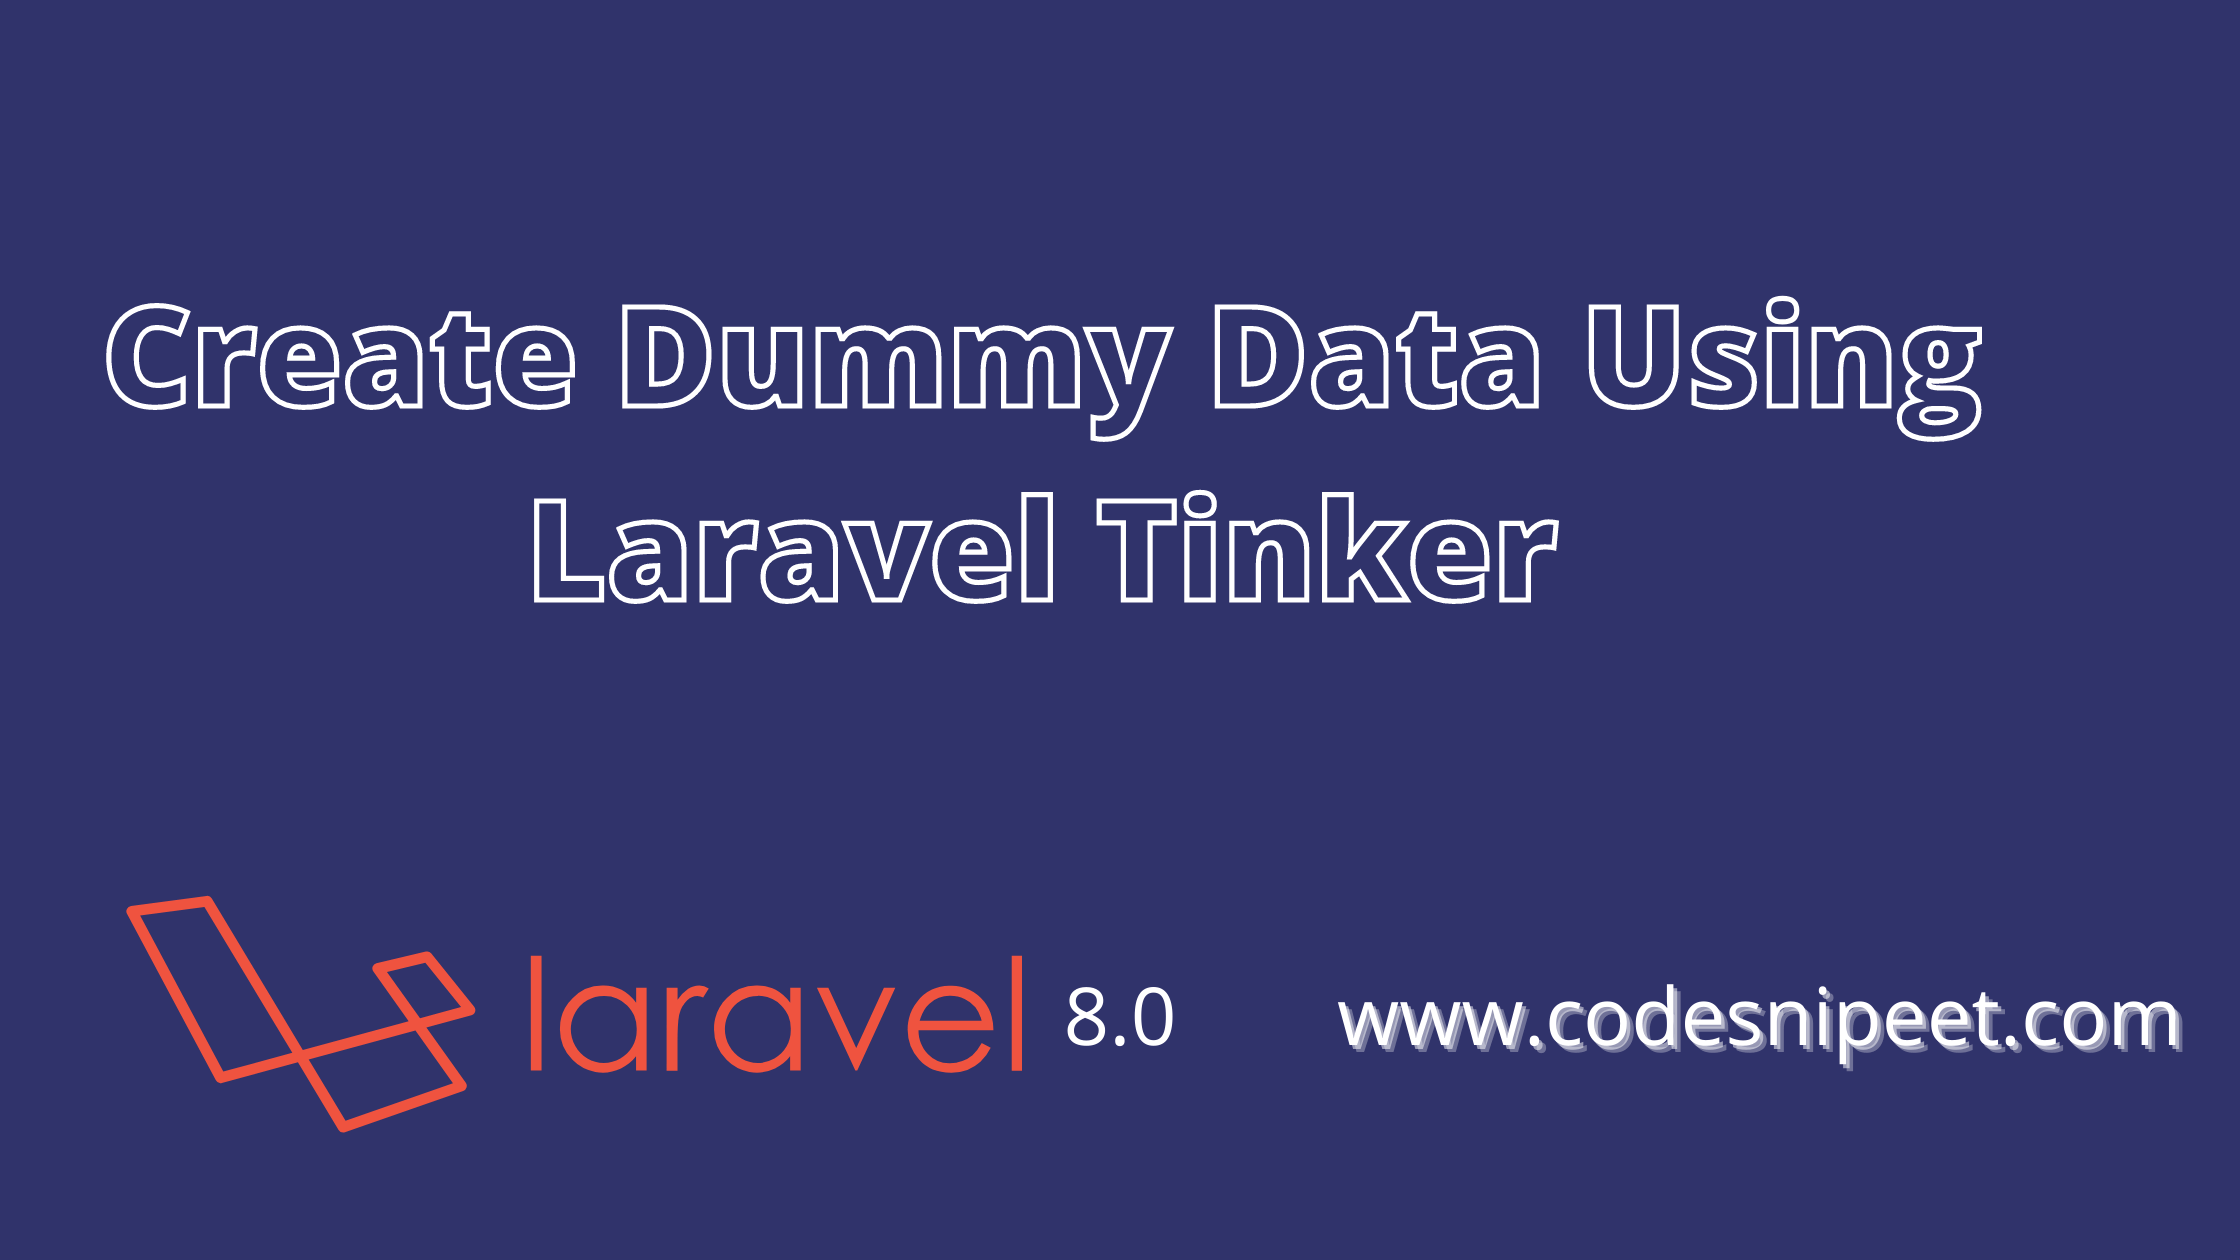 You are currently viewing Create Dummy Data Using Laravel Tinker